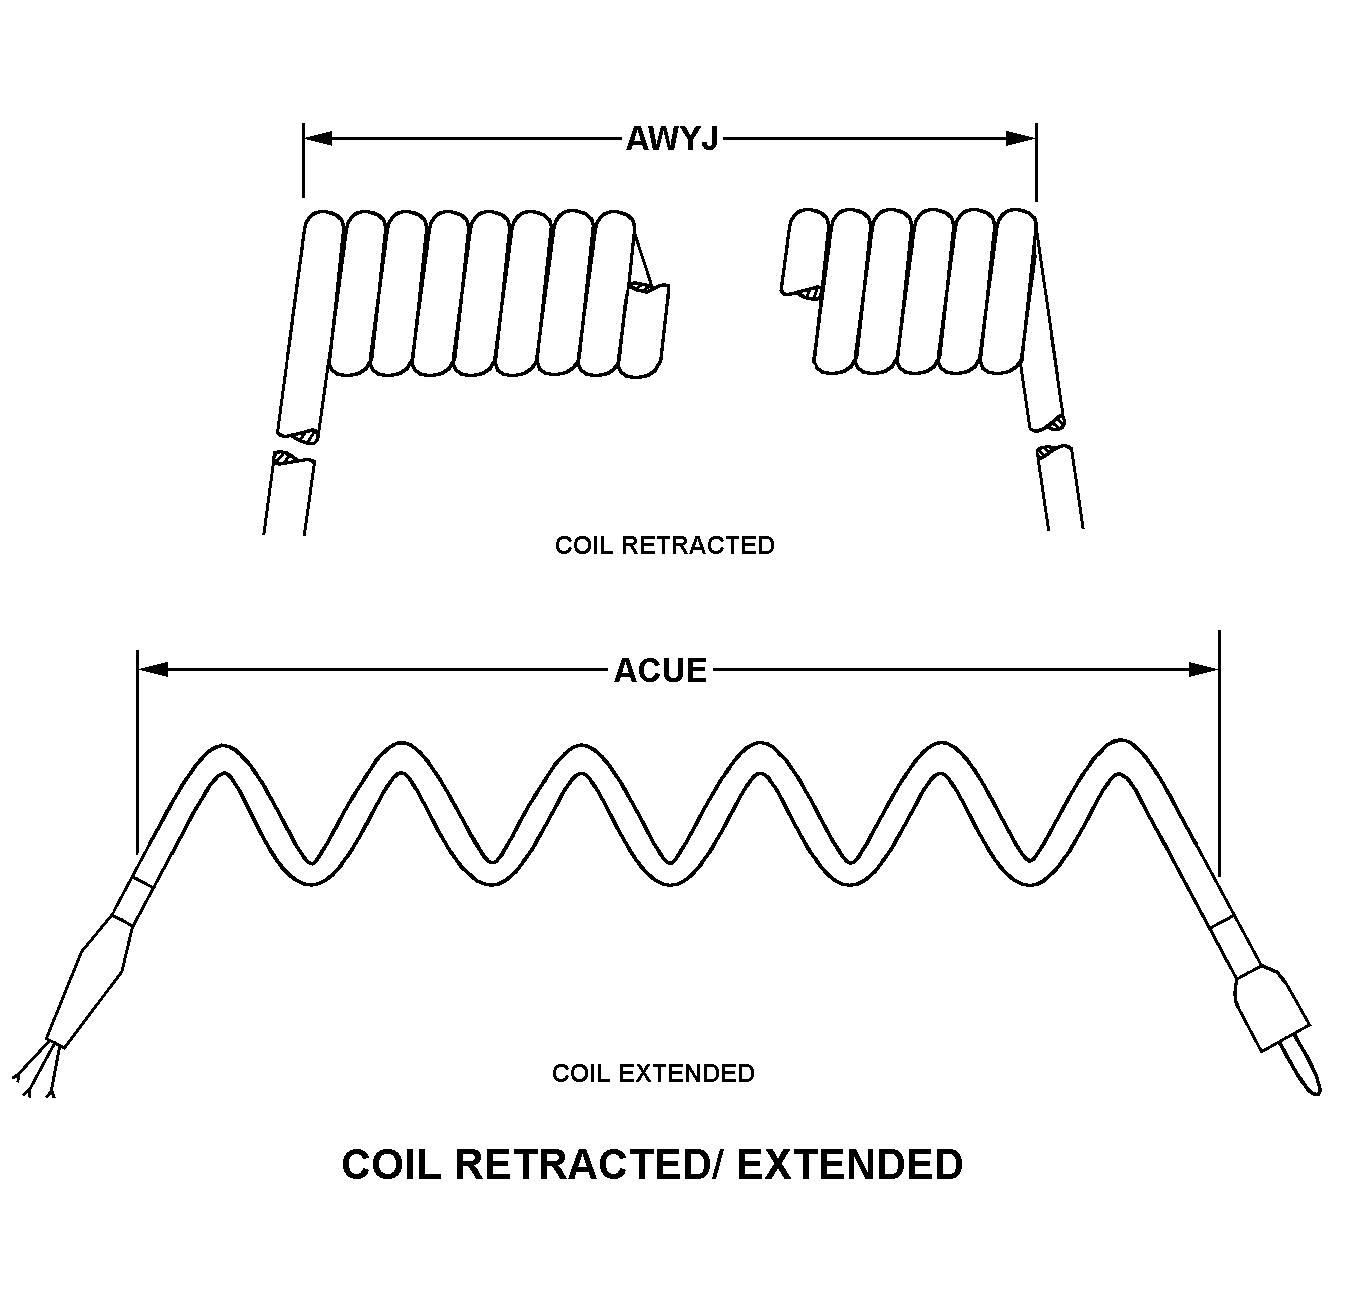 COIL RETRACTED/EXTENDED style nsn 6150-01-367-9620